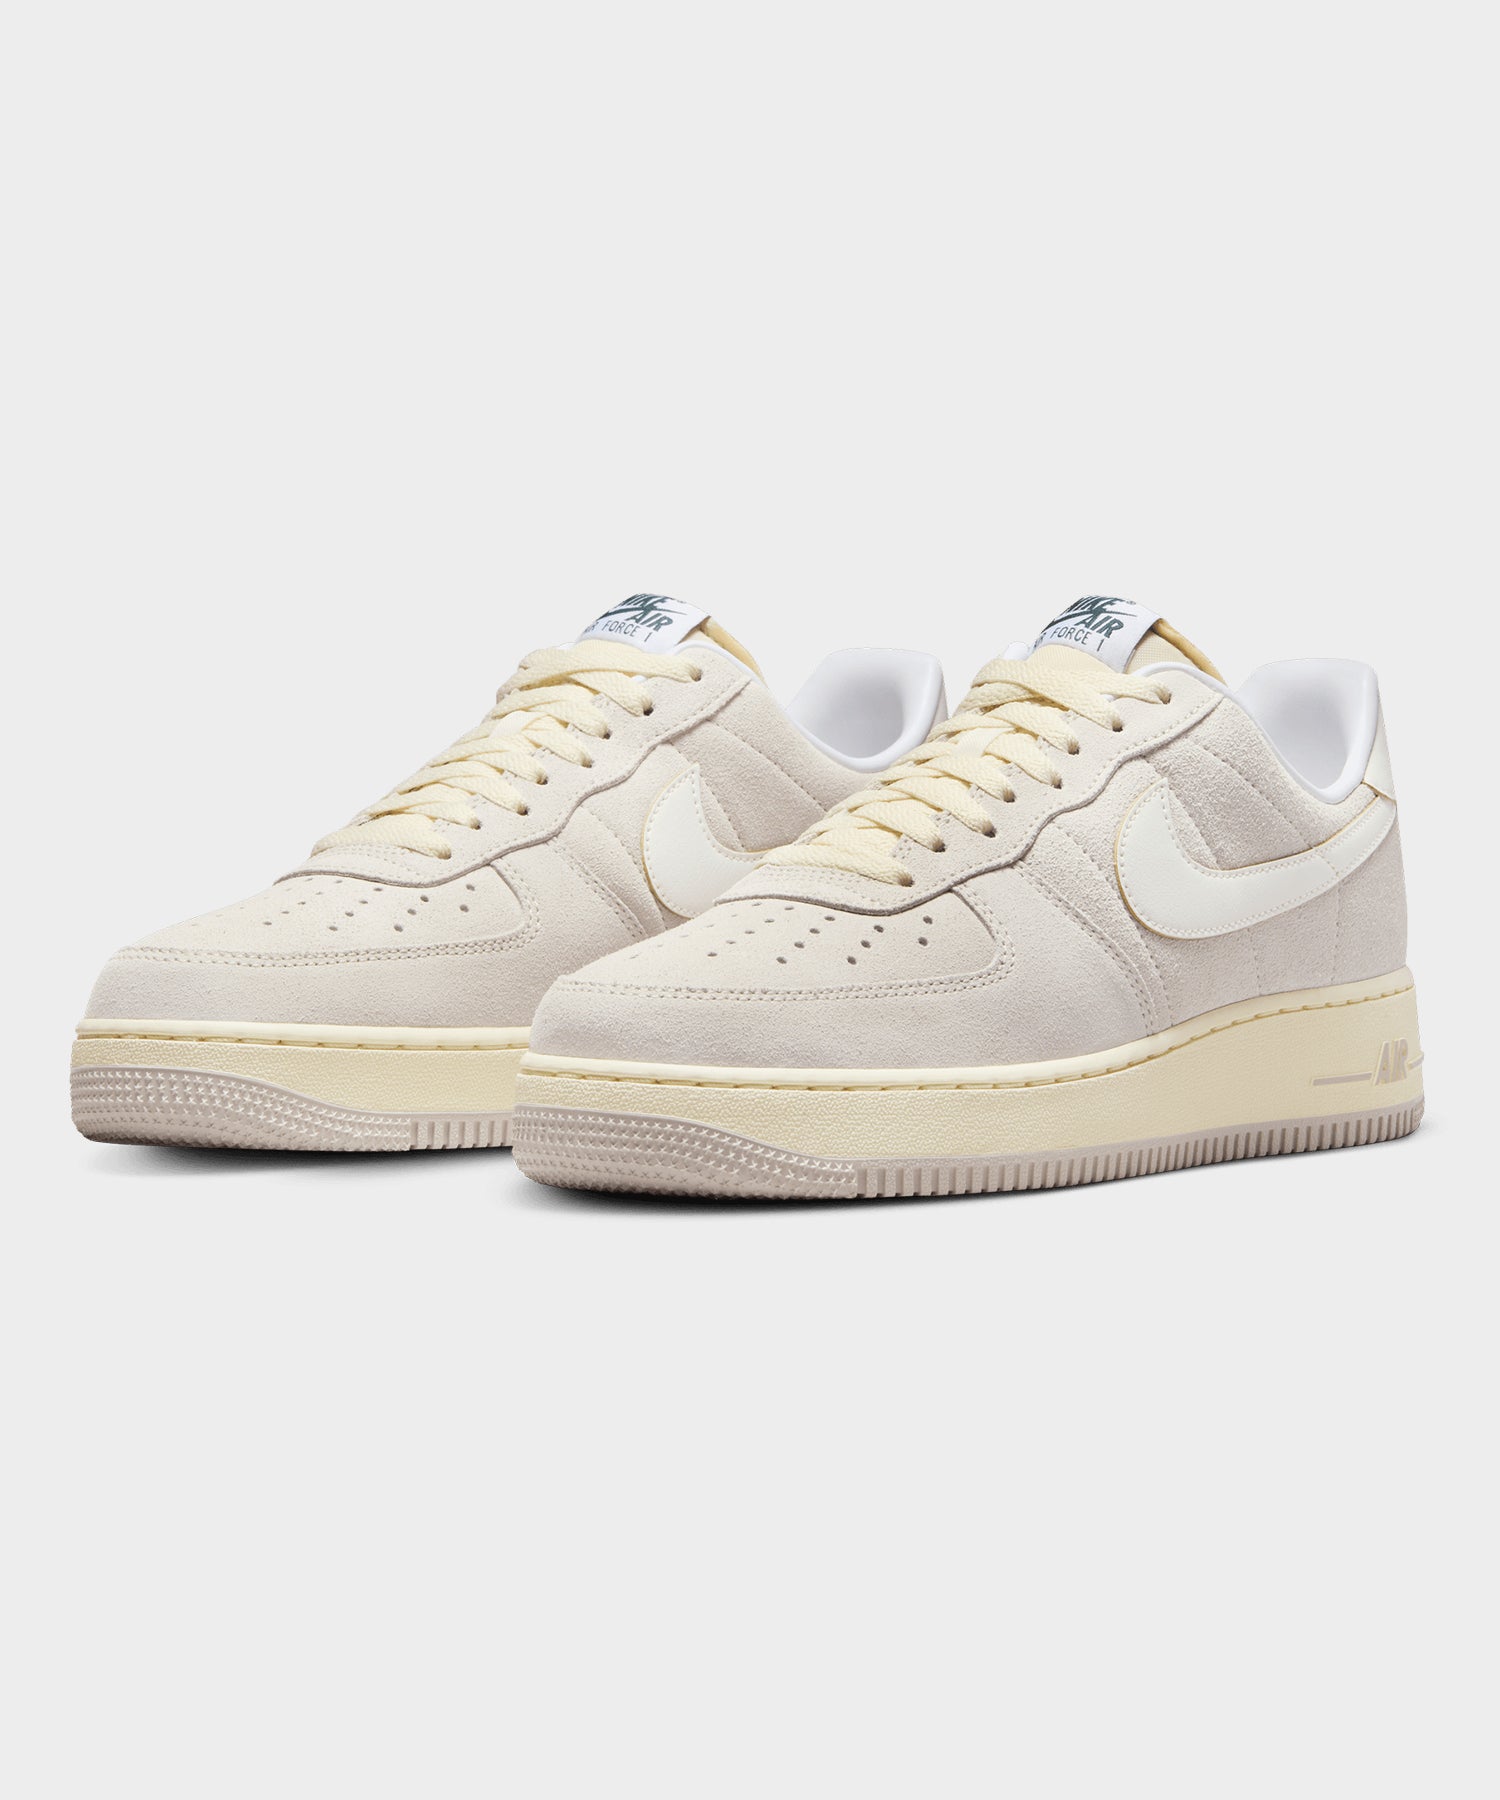 Nike Air Force 1 Low “Athletic Department”